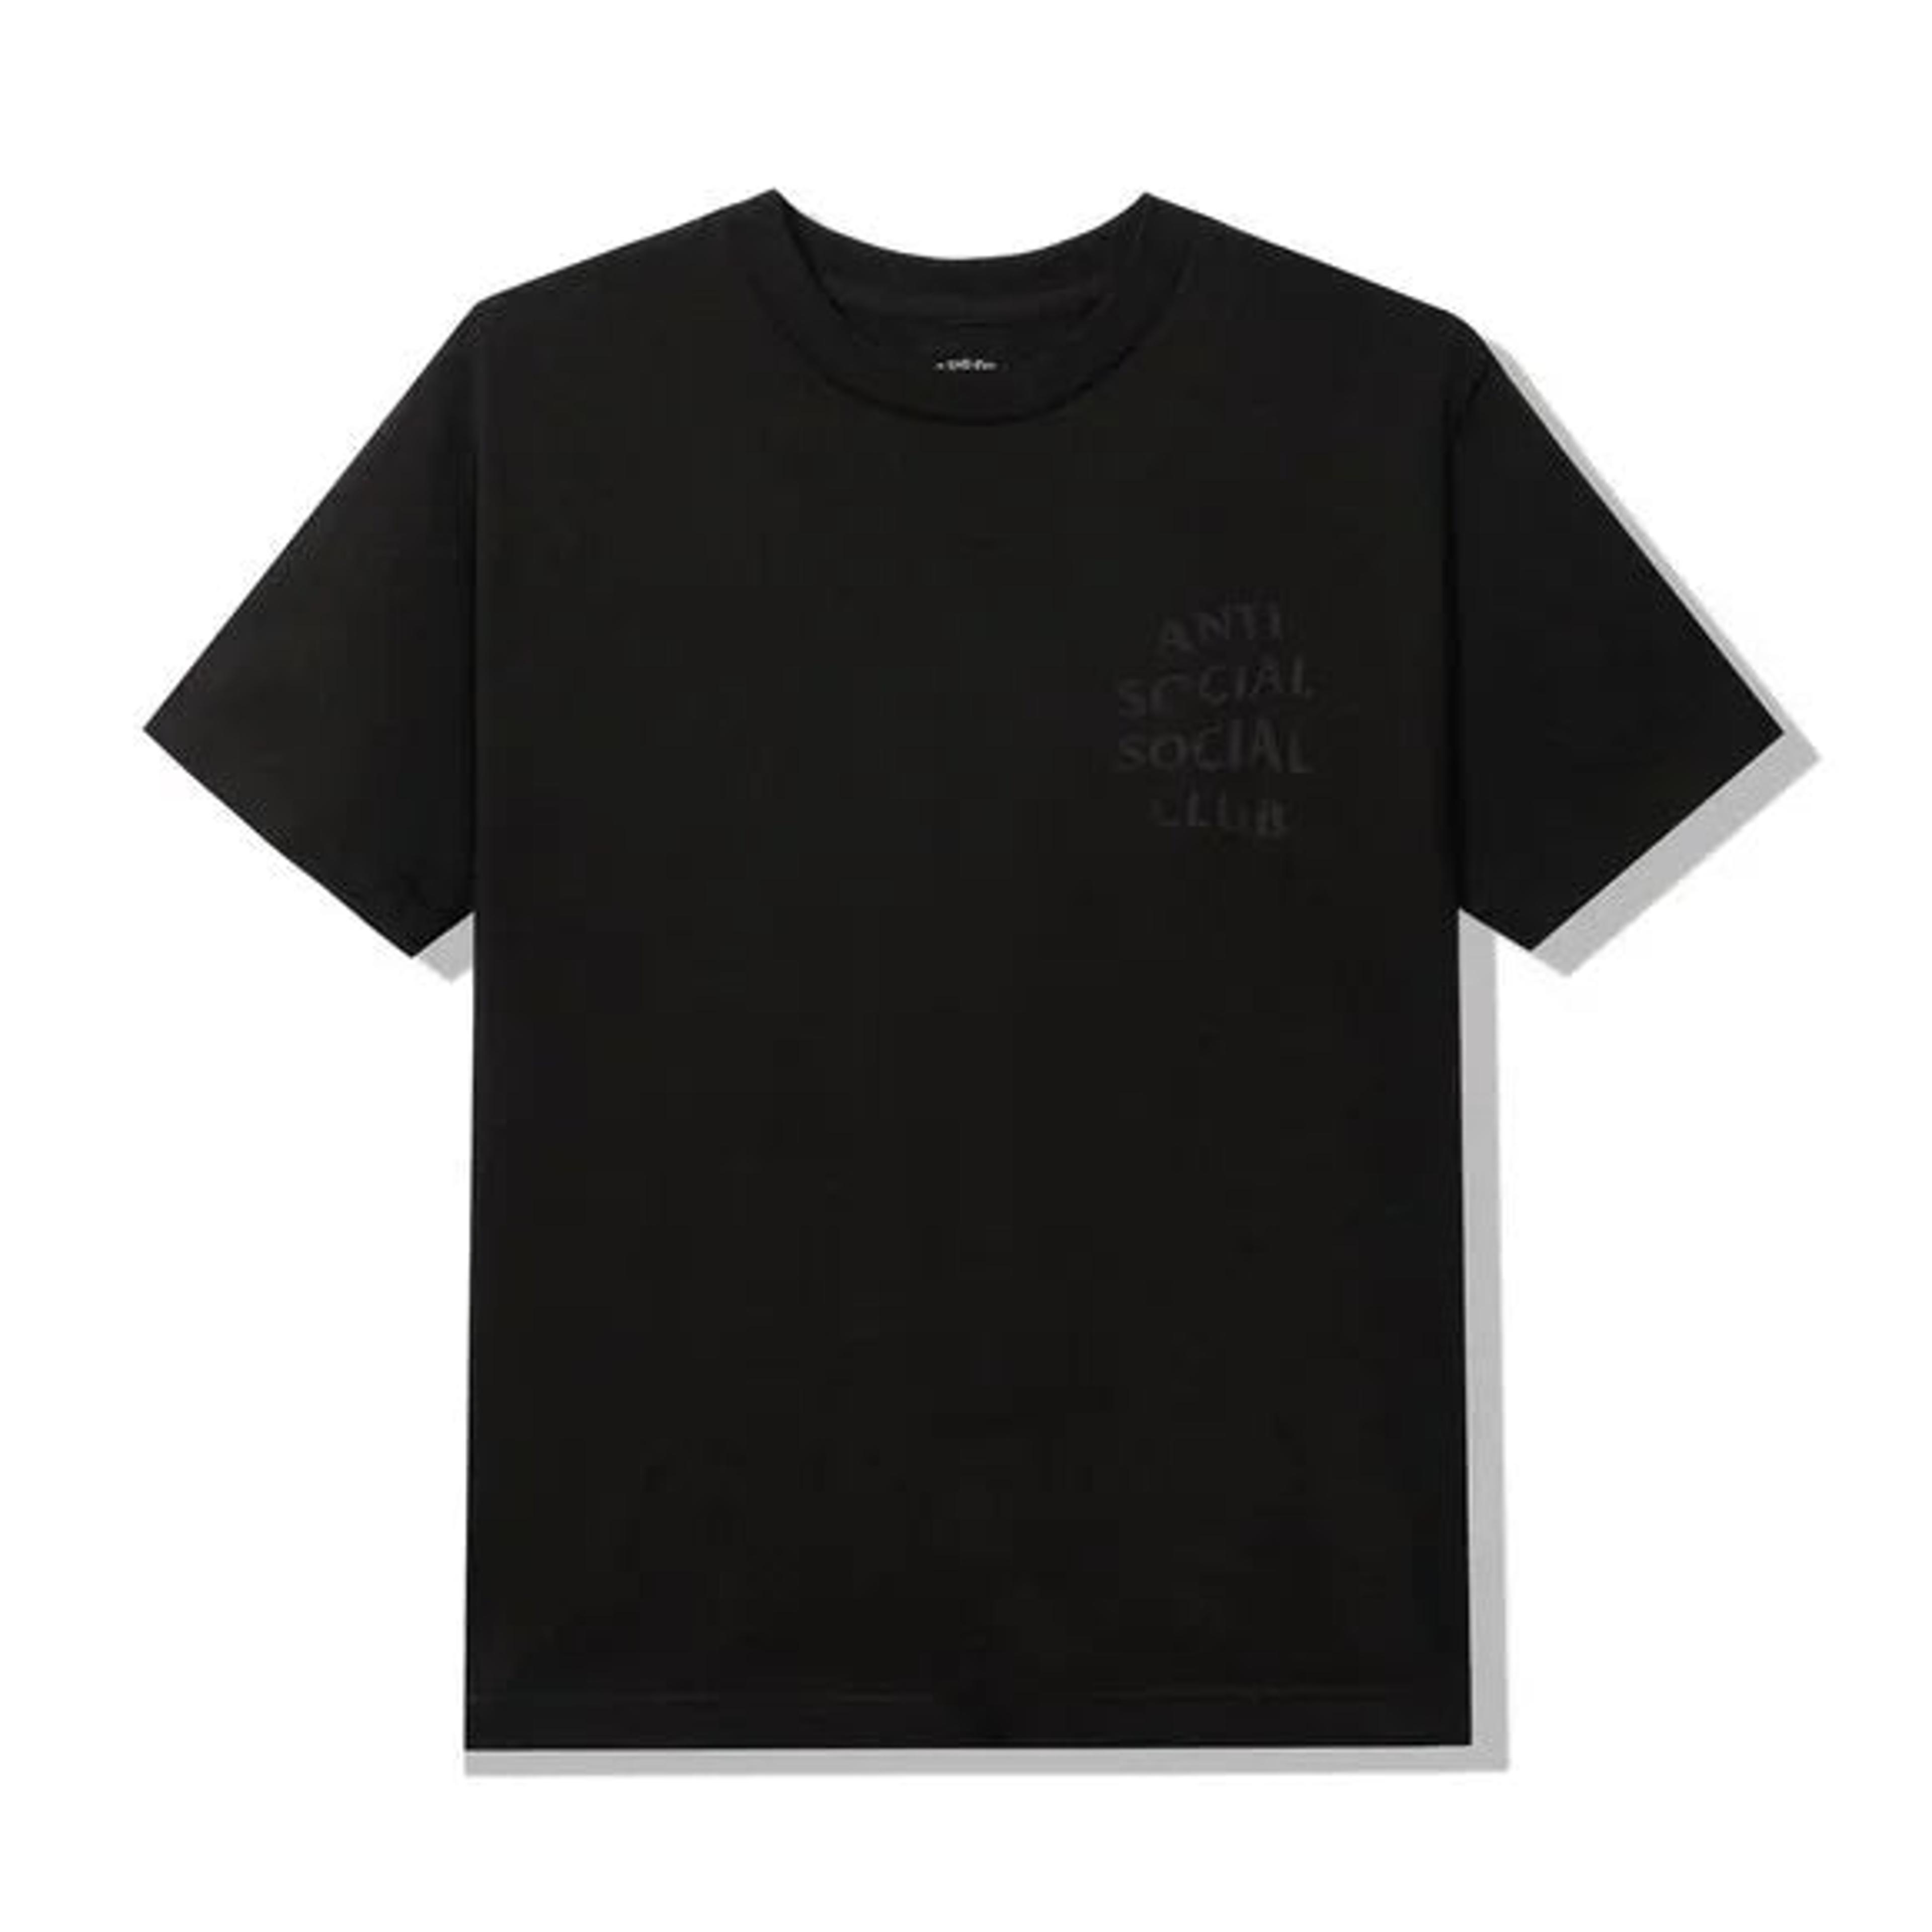 Alternate View 1 of Anti Social Social Club Hell O Rose Black Tee ASSC DS Brand New